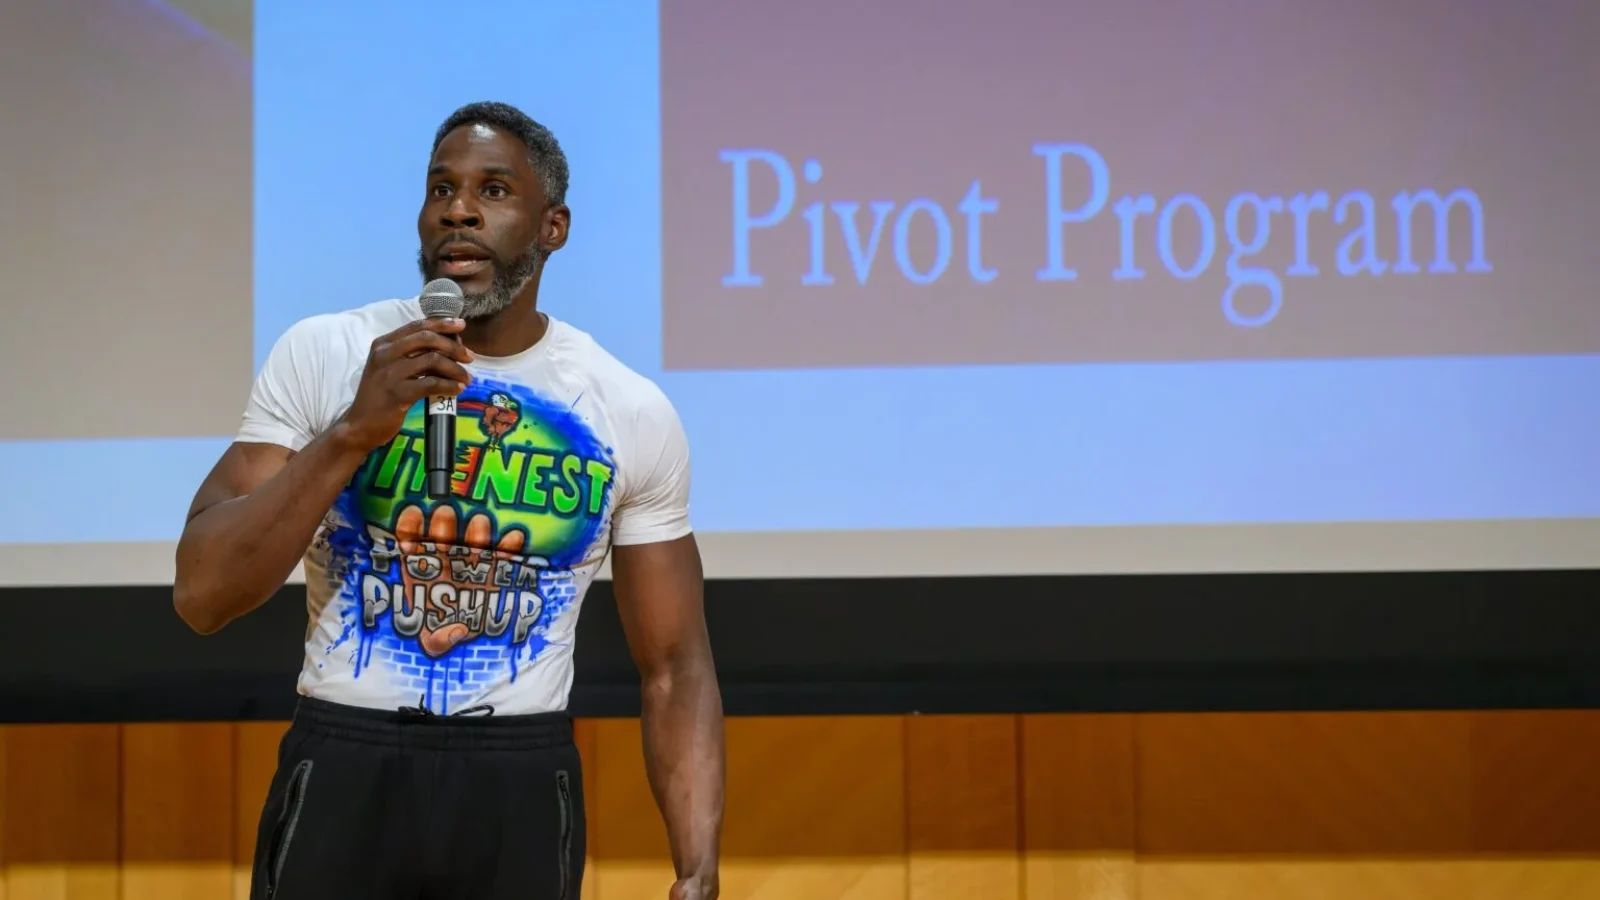 Pivot&#039;s Raashed Hall presents at the MSB Rocket Pitch competition on Feb. 2 in front of a screen that reads &quot;Pivot Program.&quot;